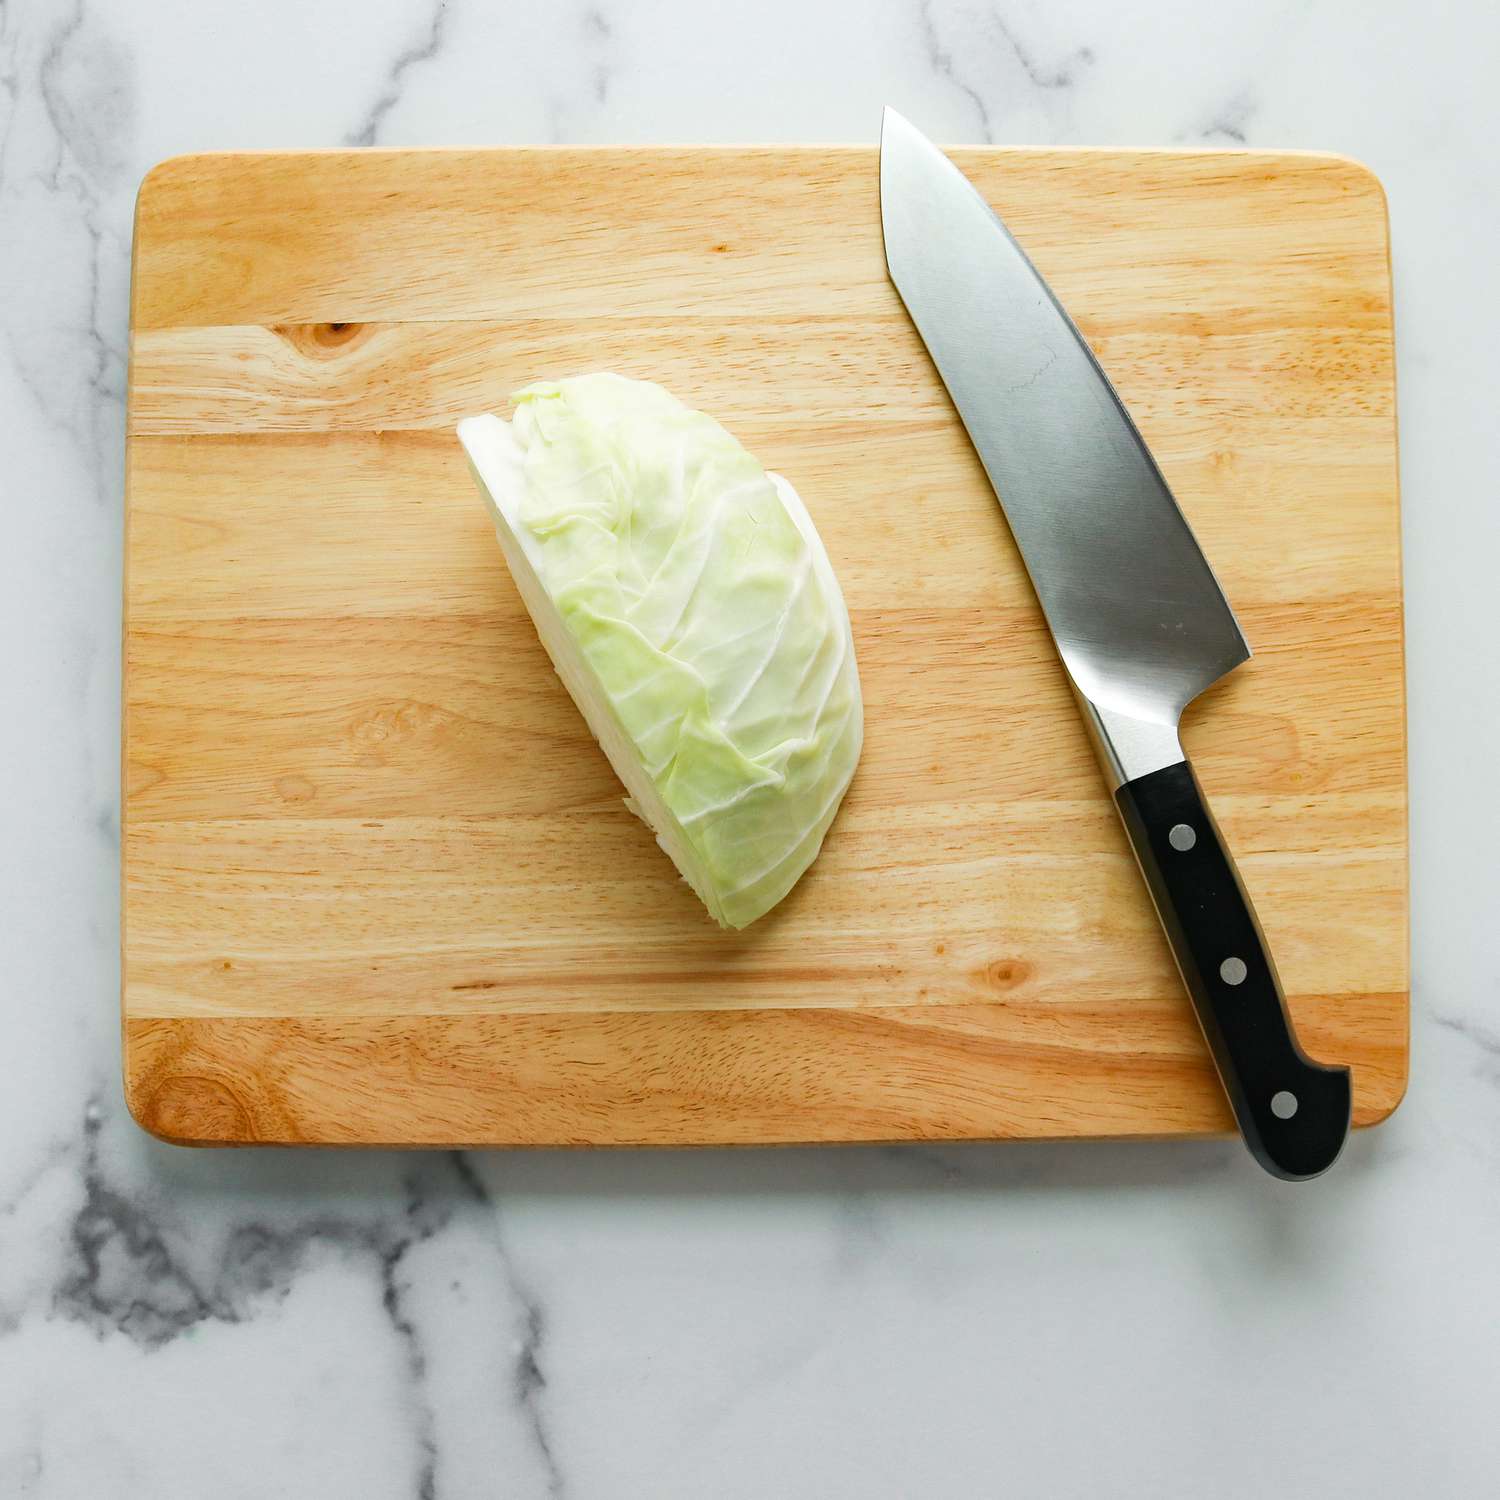 A wedge of cabbage sitting on a cutting board next to a knife